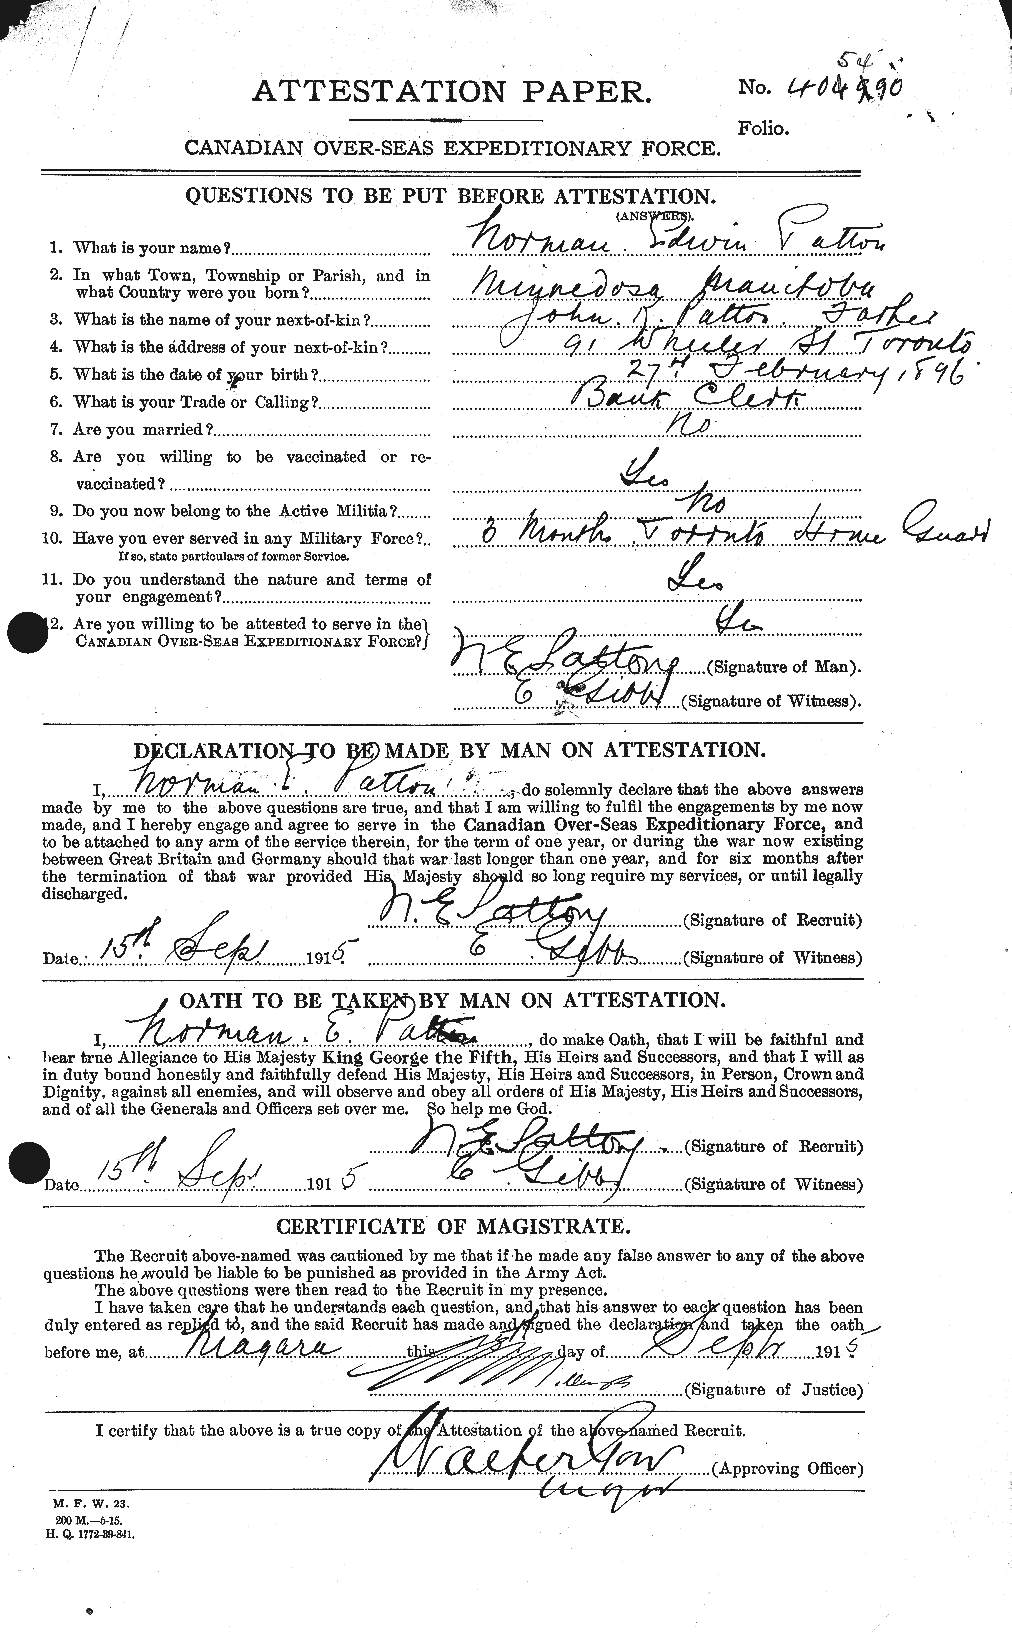 Personnel Records of the First World War - CEF 569059a